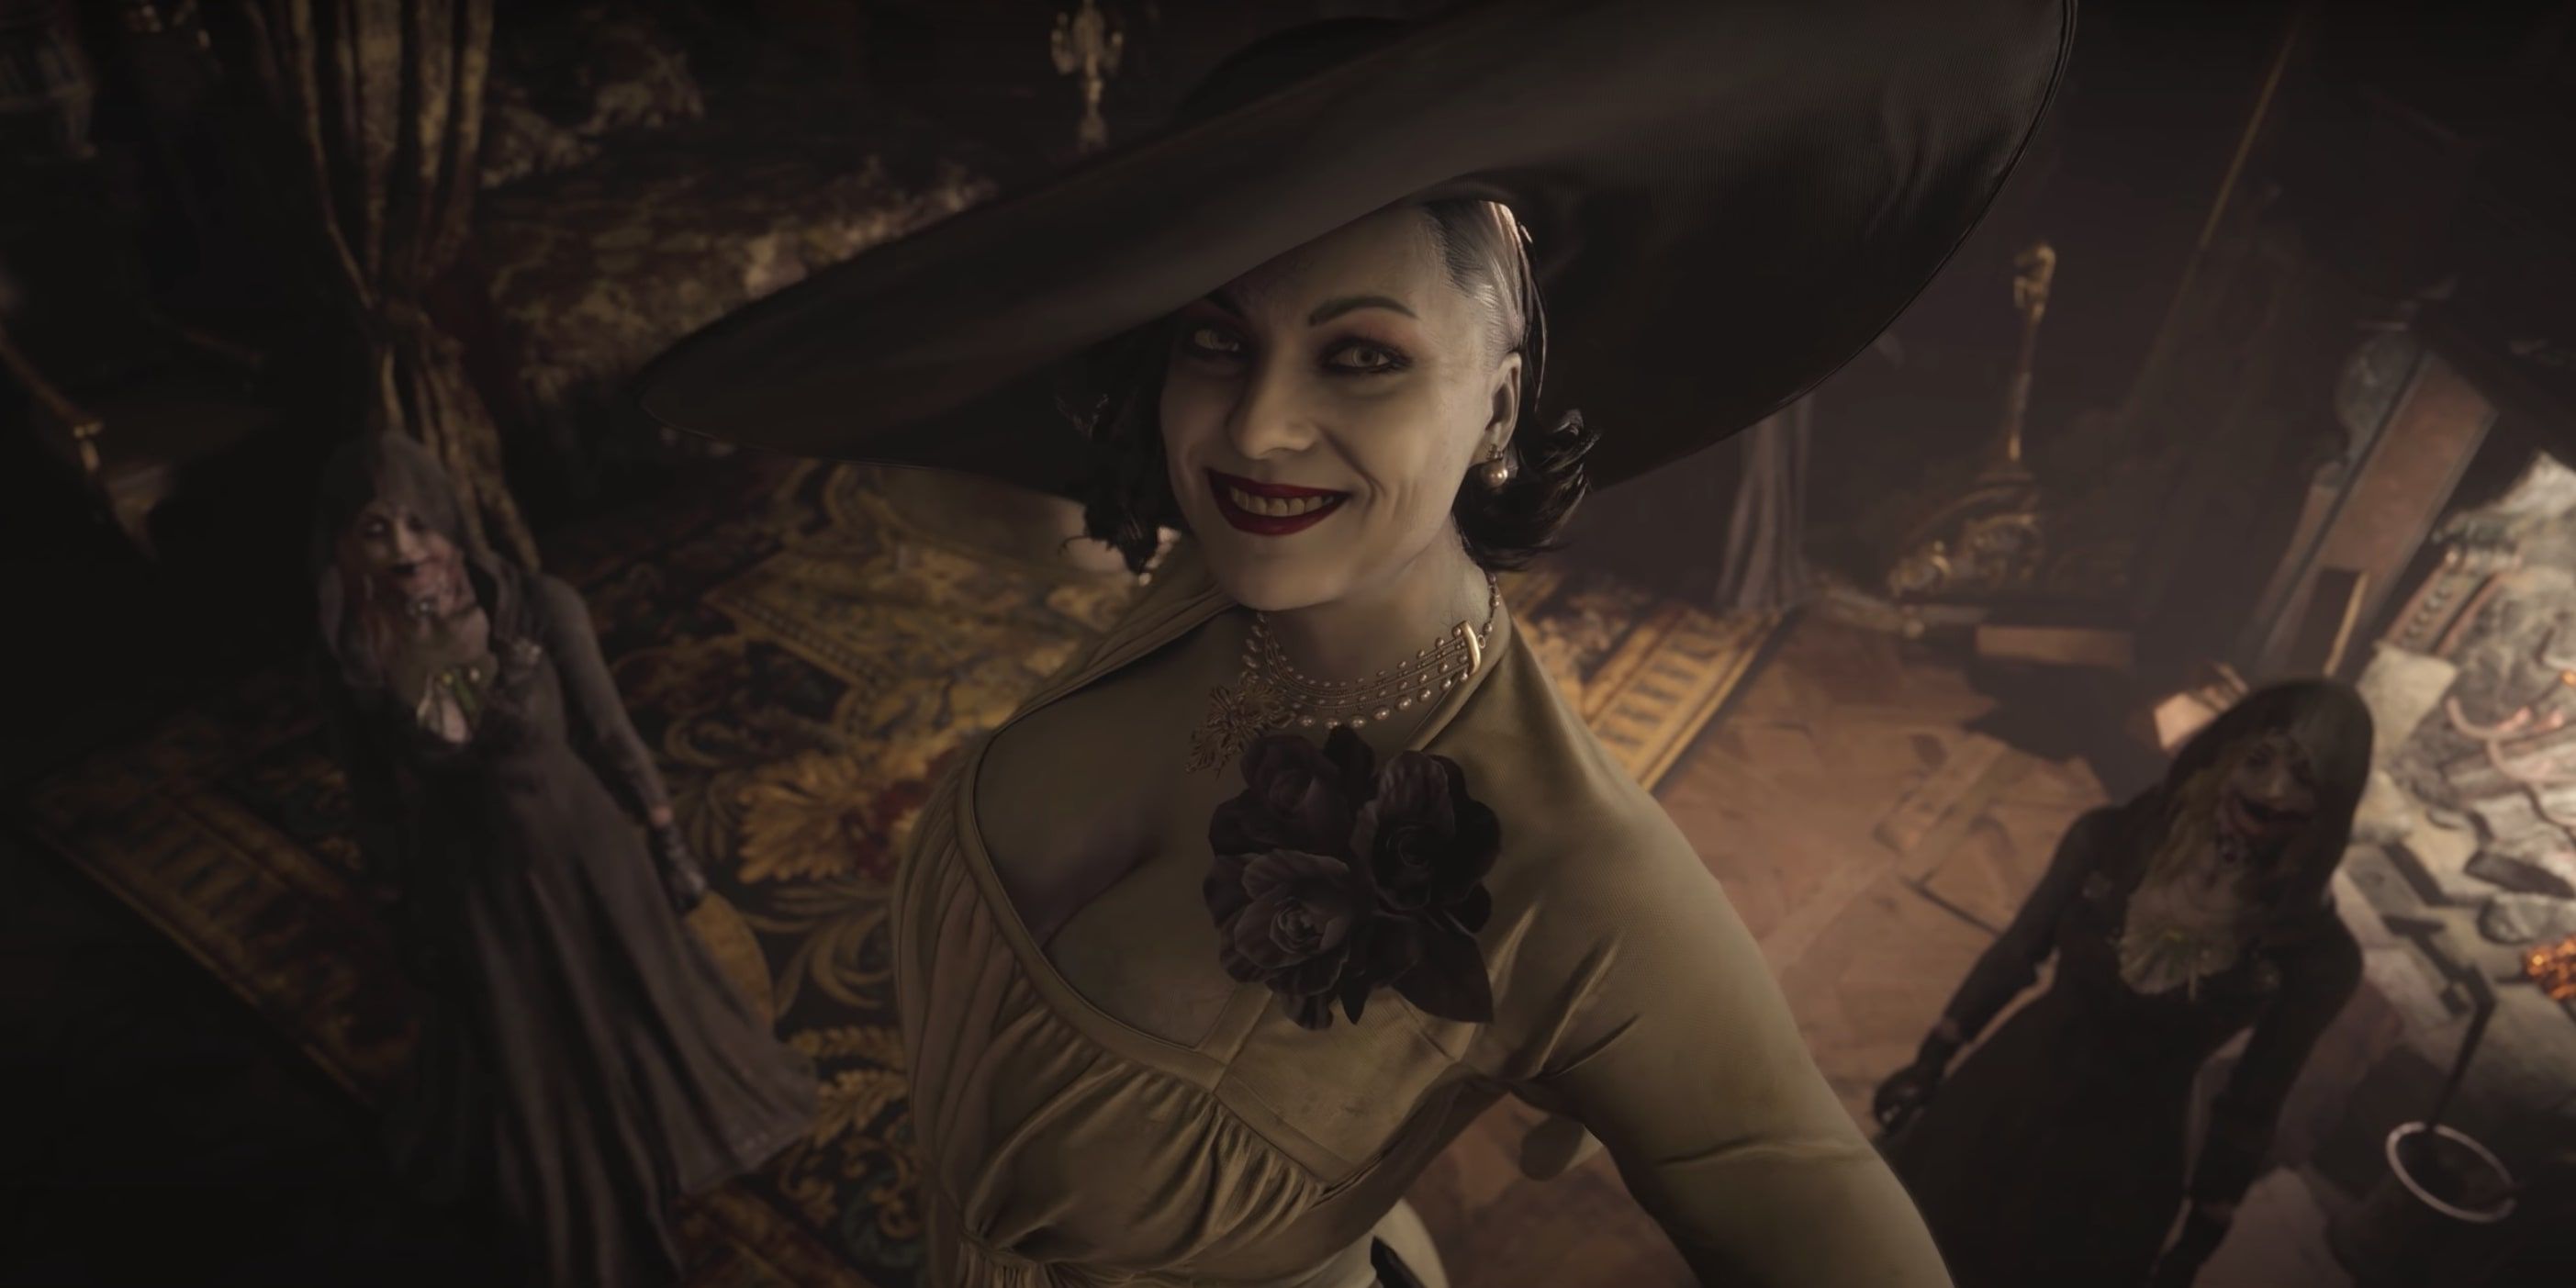 image from the game Resident Evil Village featuring Lady Dimitrescu and her daughters